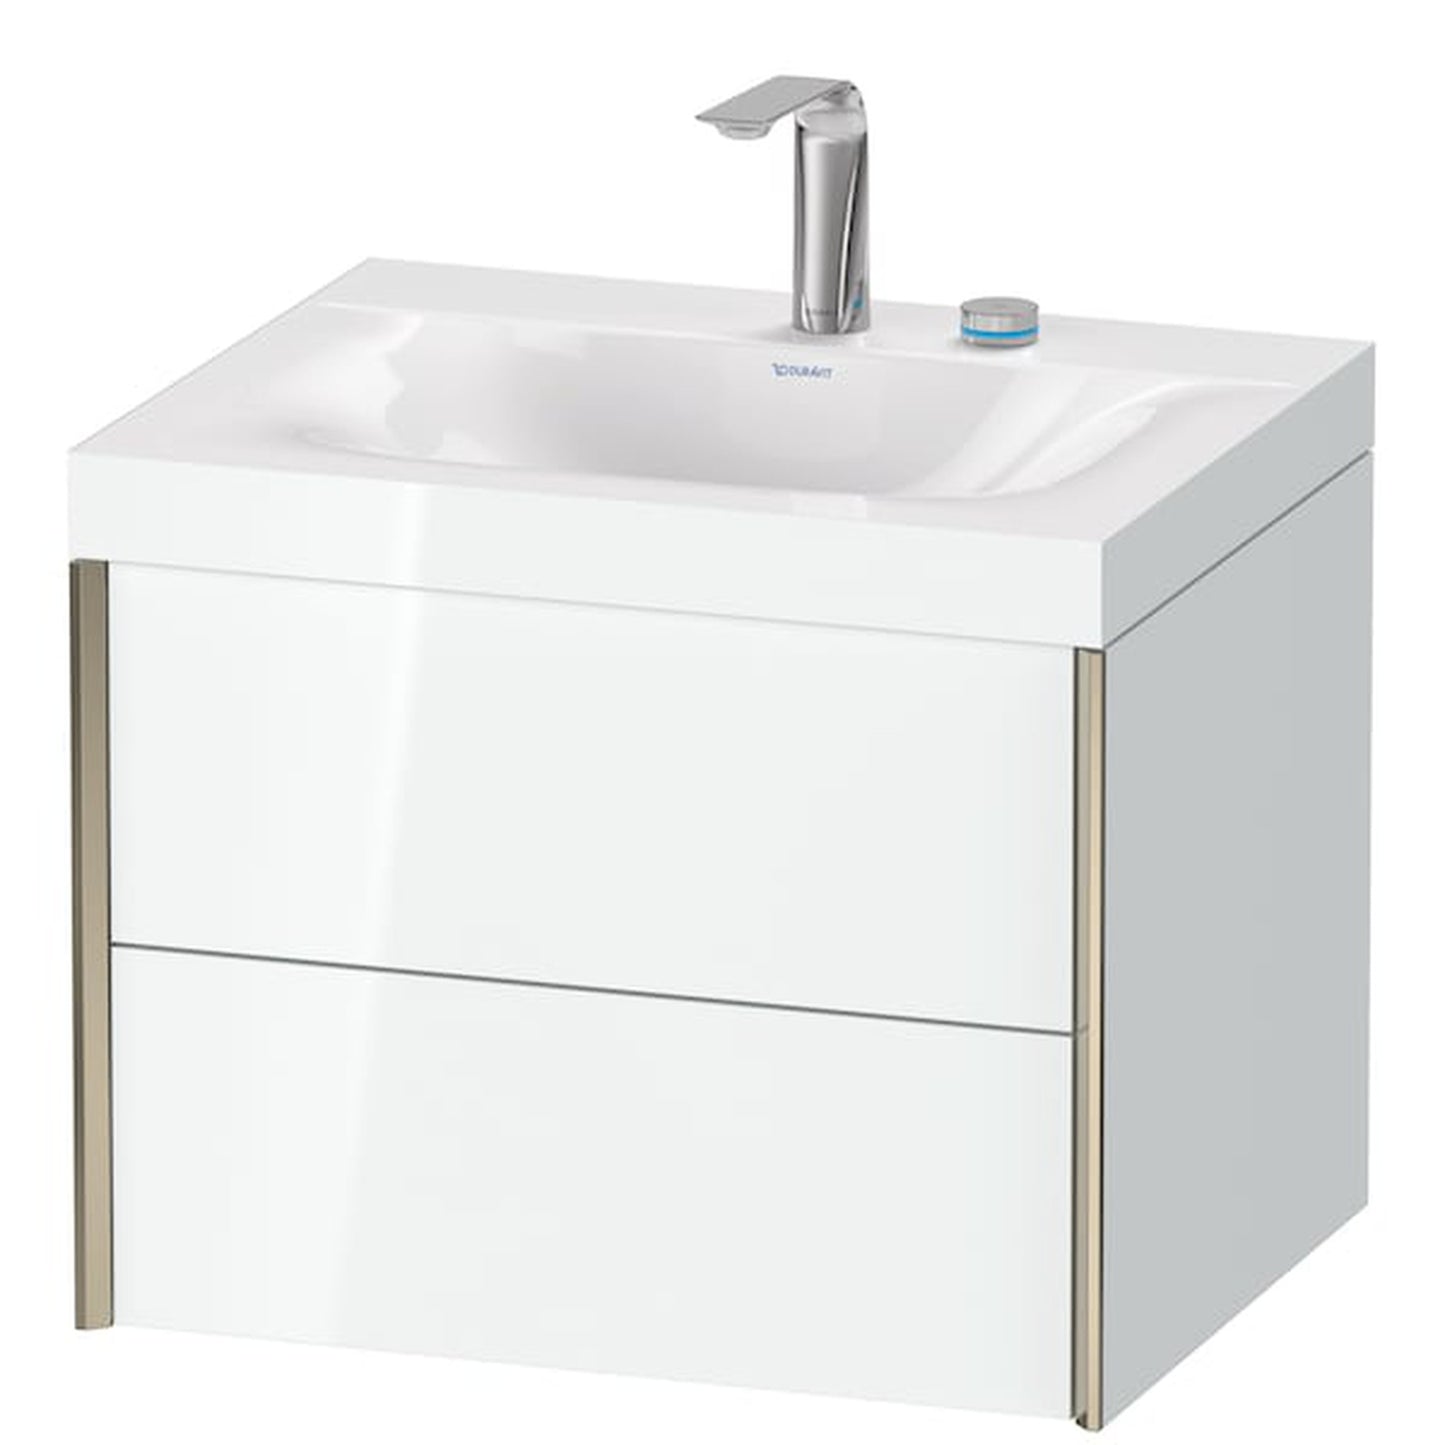 Duravit Xviu 24" x 20" x 19" Two Drawer C-Bonded Wall-Mount Vanity Kit With Two Tap Holes, White (XV4614EB185C)